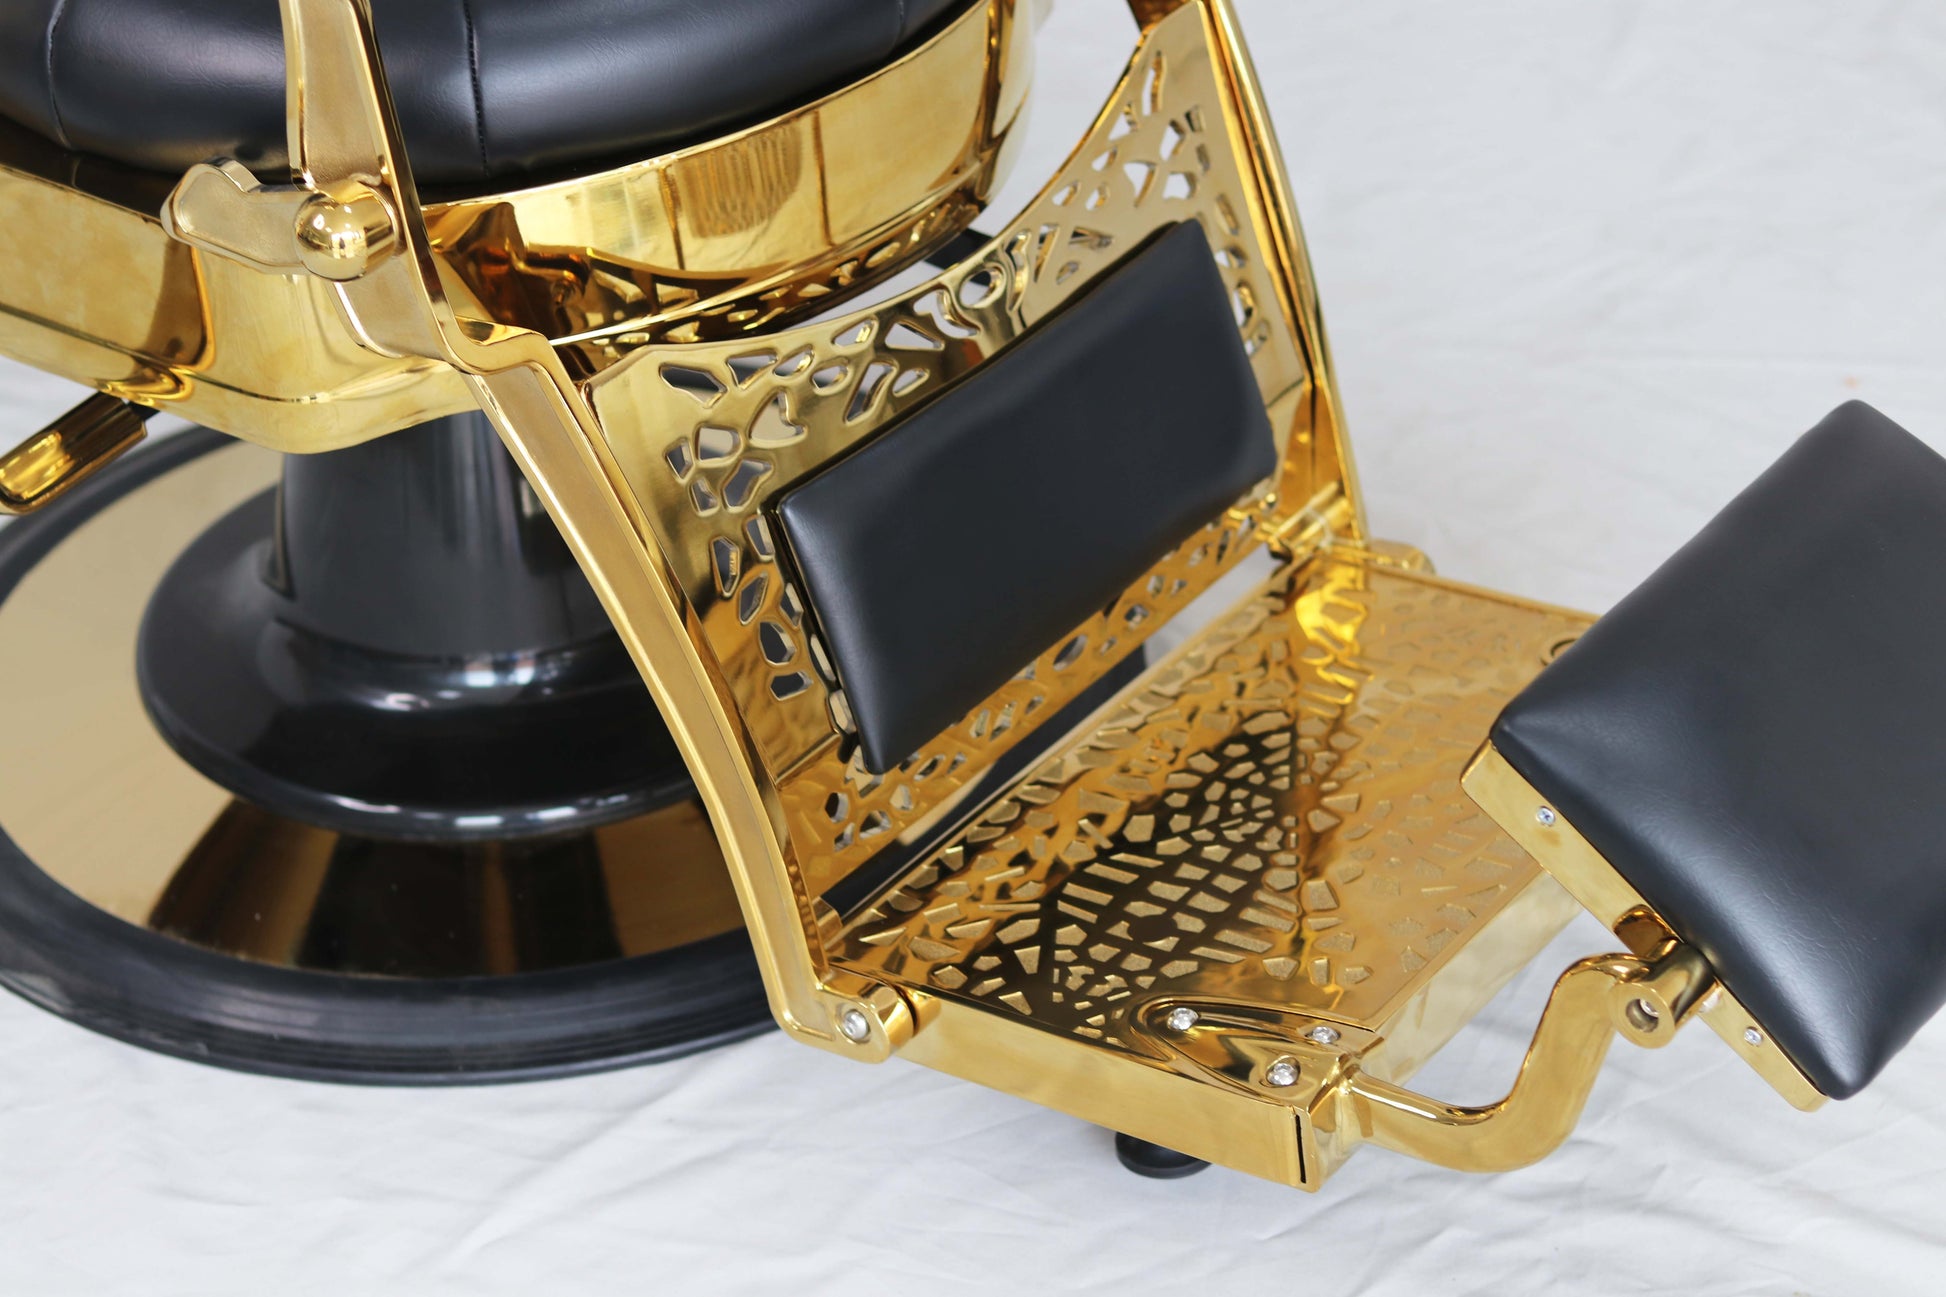 beauty salon furniture man hydraulic reclining american custom vintage gold black barber chair for sale cheap - HAB - Hair And Beauty